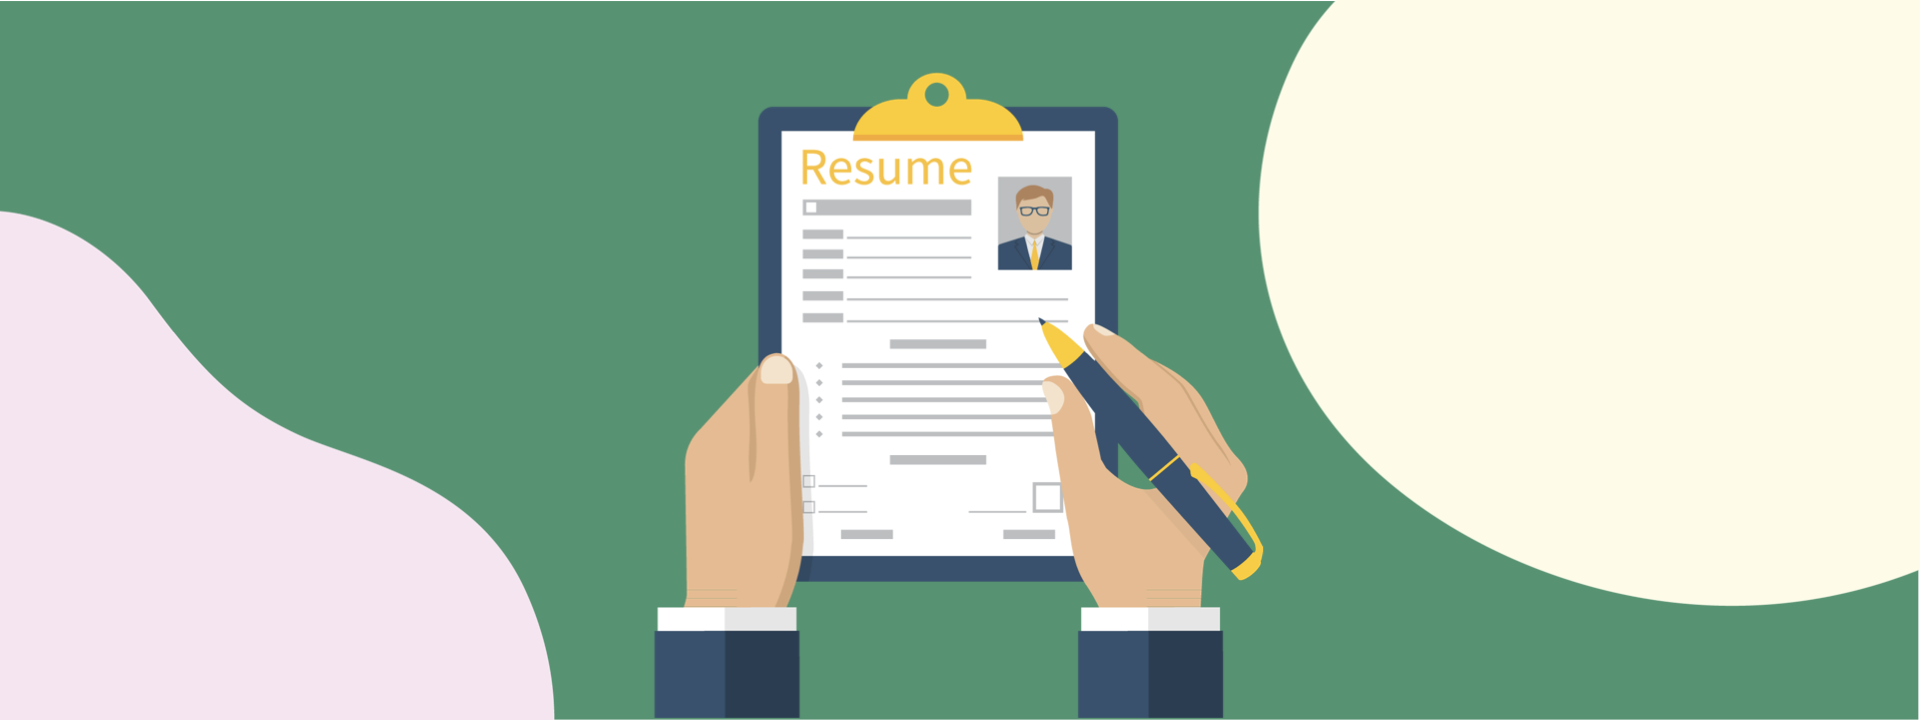  7 Tips for Tailoring your Resume by Industry and Job Description